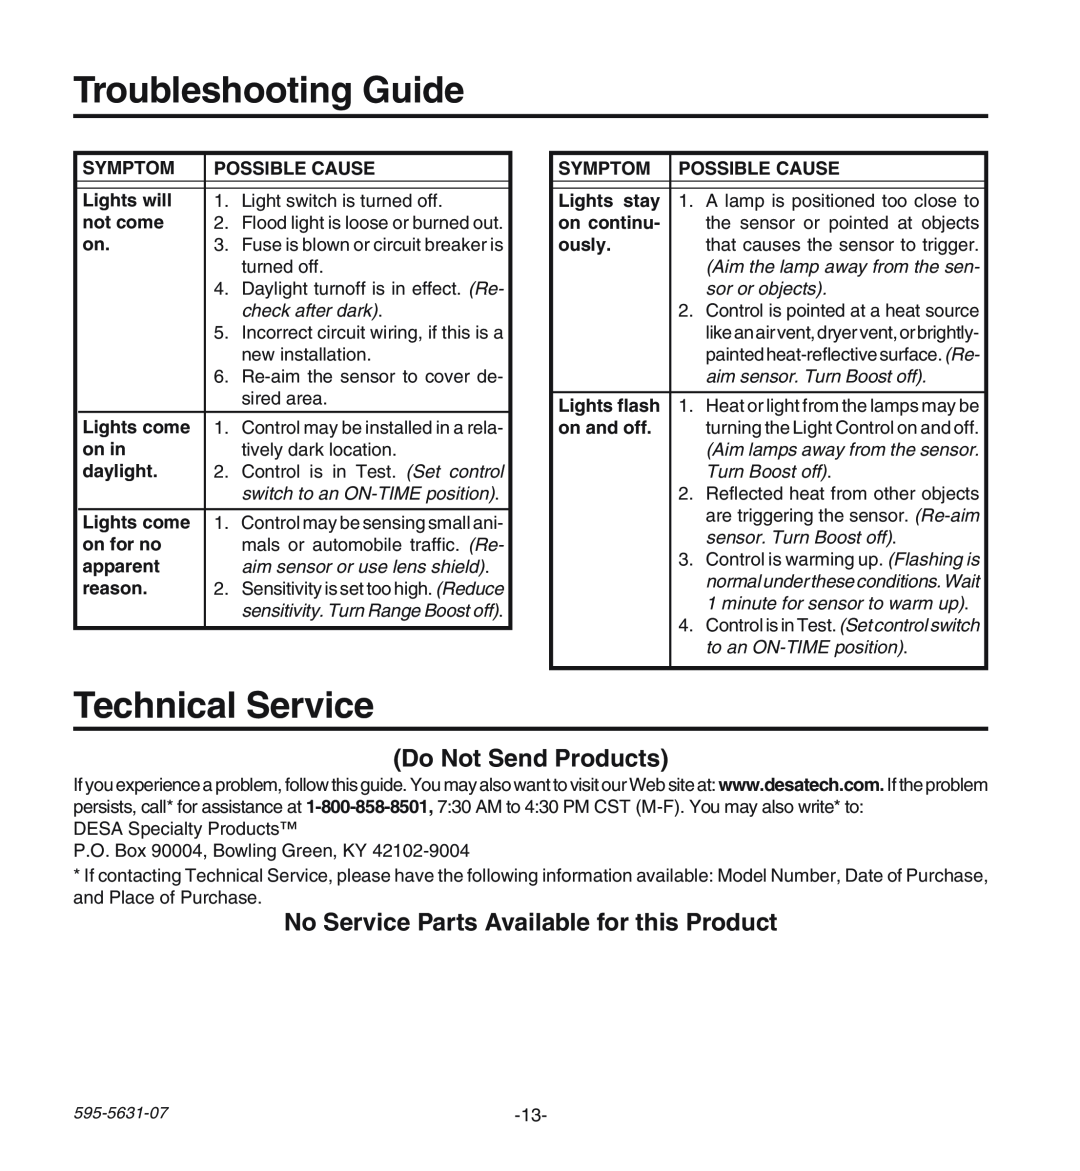 Desa HD-9240 Troubleshooting Guide, Technical Service, Do Not Send Products, No Service Parts Available for this Product 